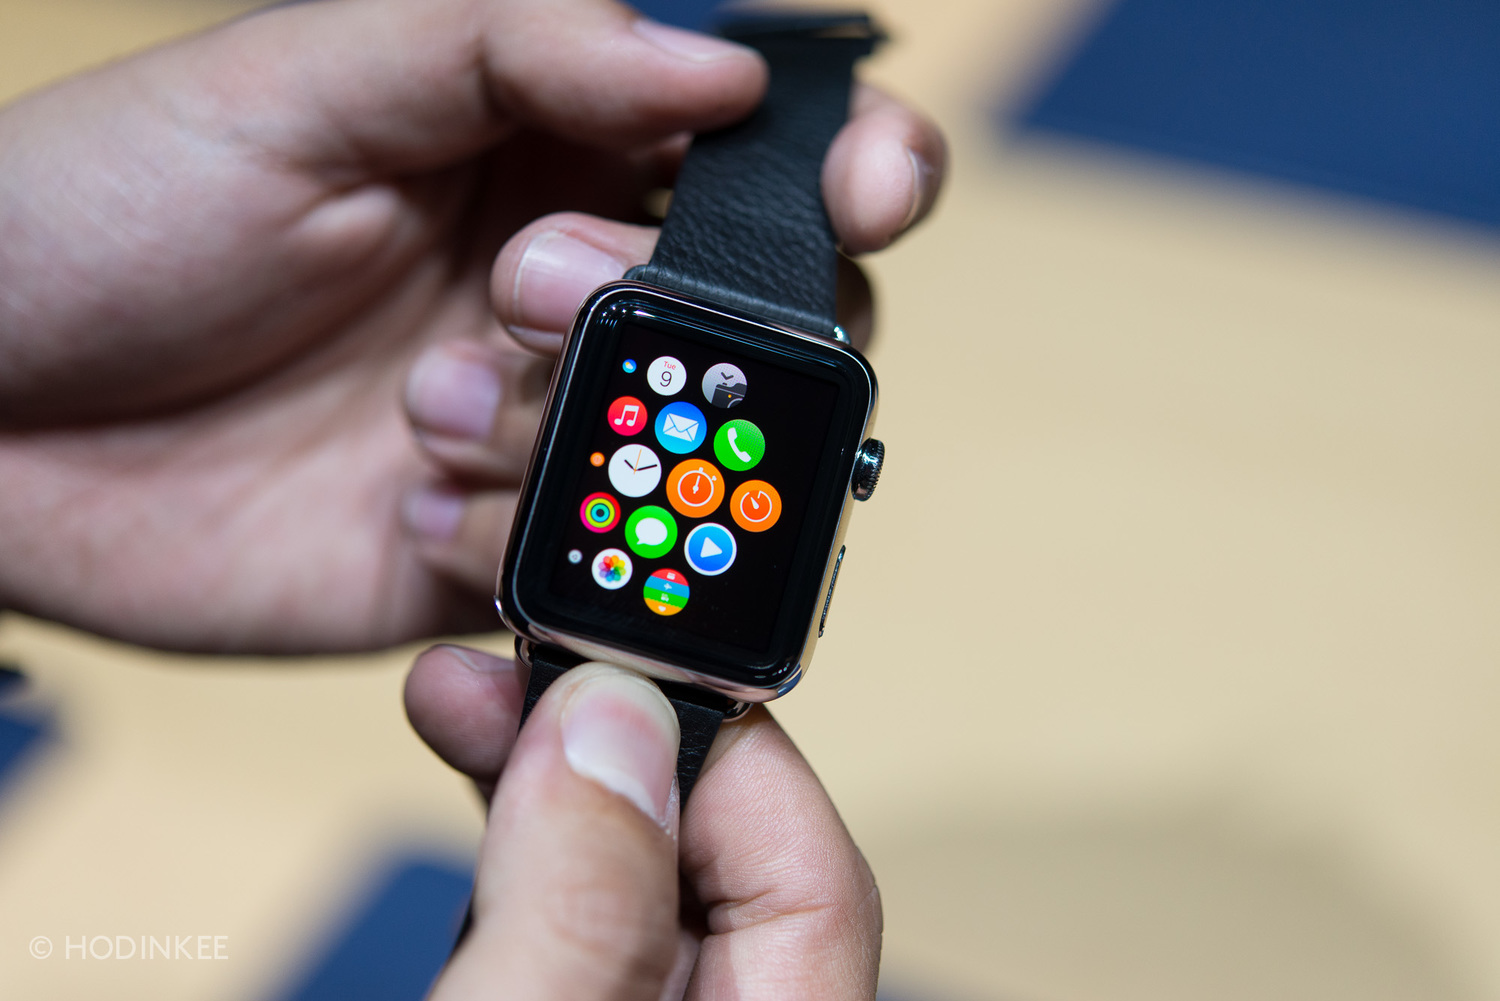 In-Depth: A Watch Guy's Thoughts On The Apple Watch After Seeing